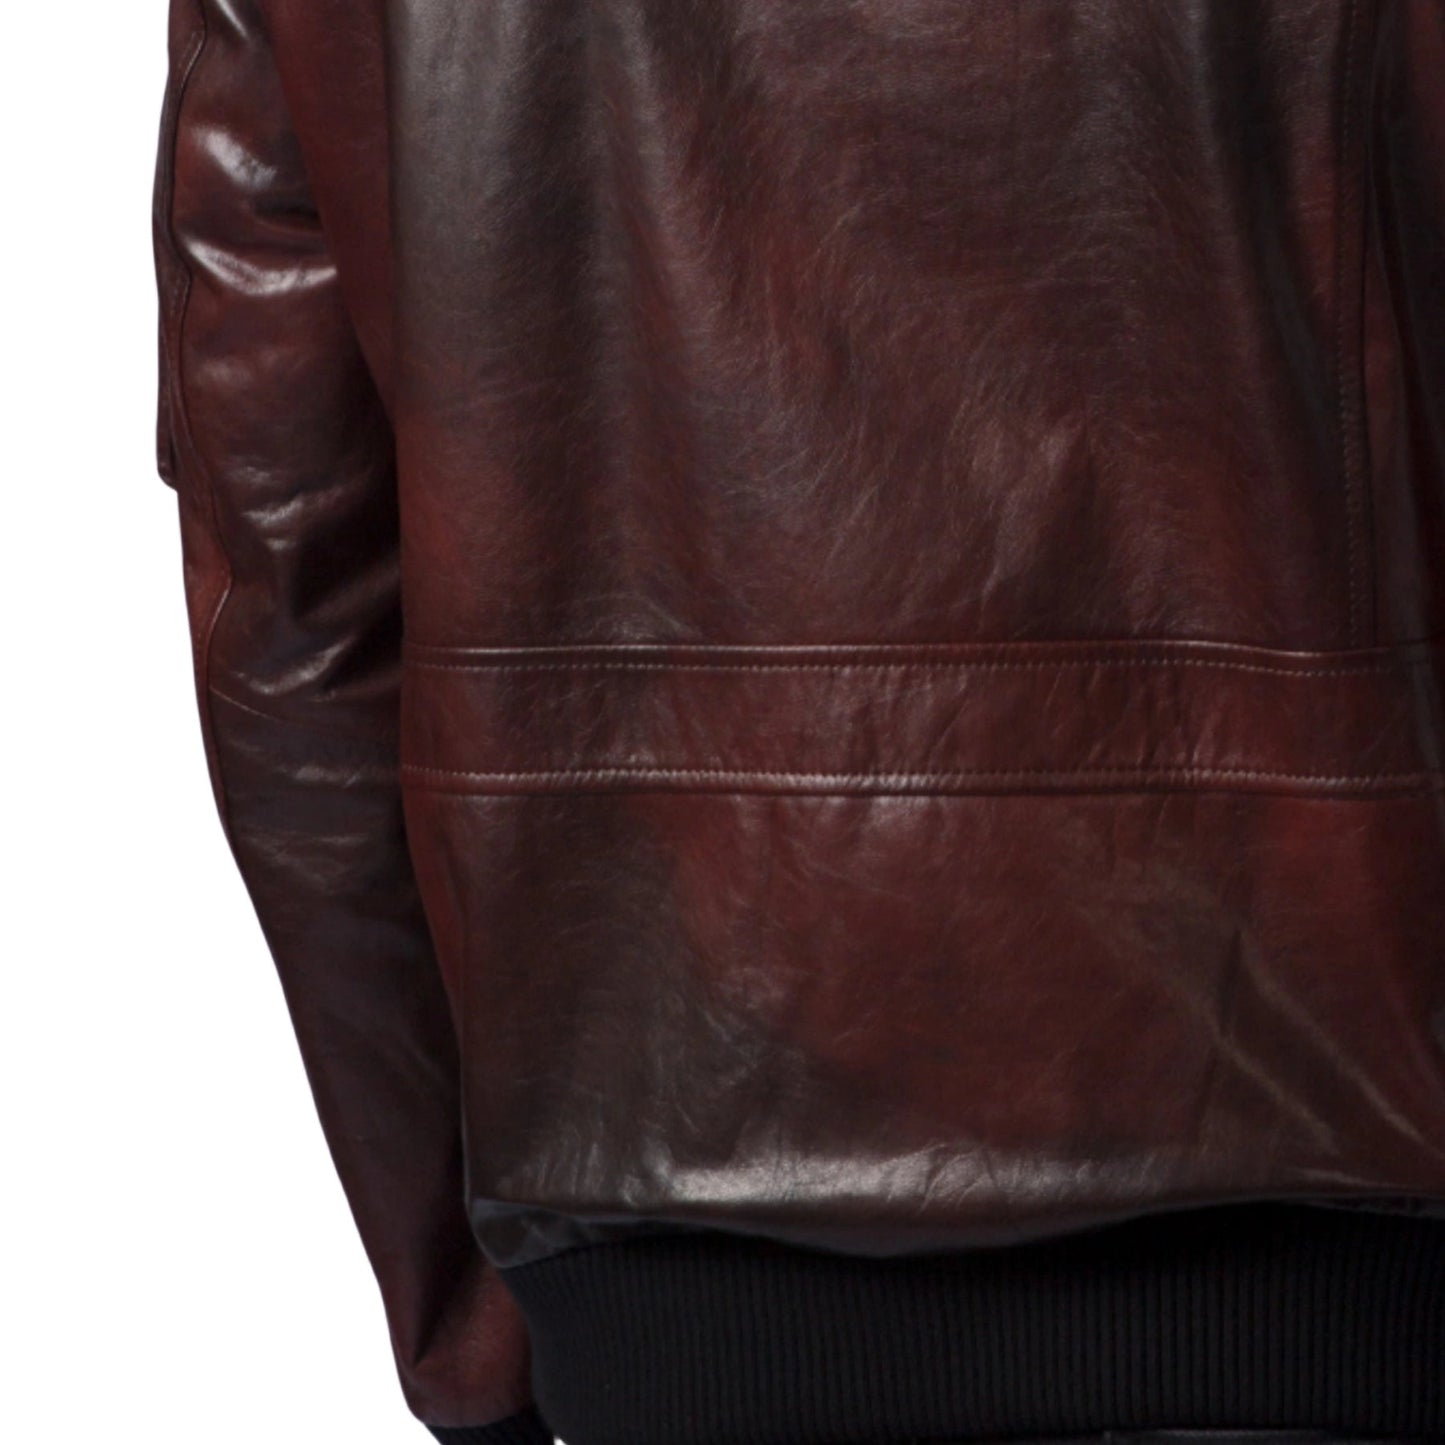 Reddish Brown G-1 Navy Aviator Leather Bomber Jacket with Removable Fur Collar